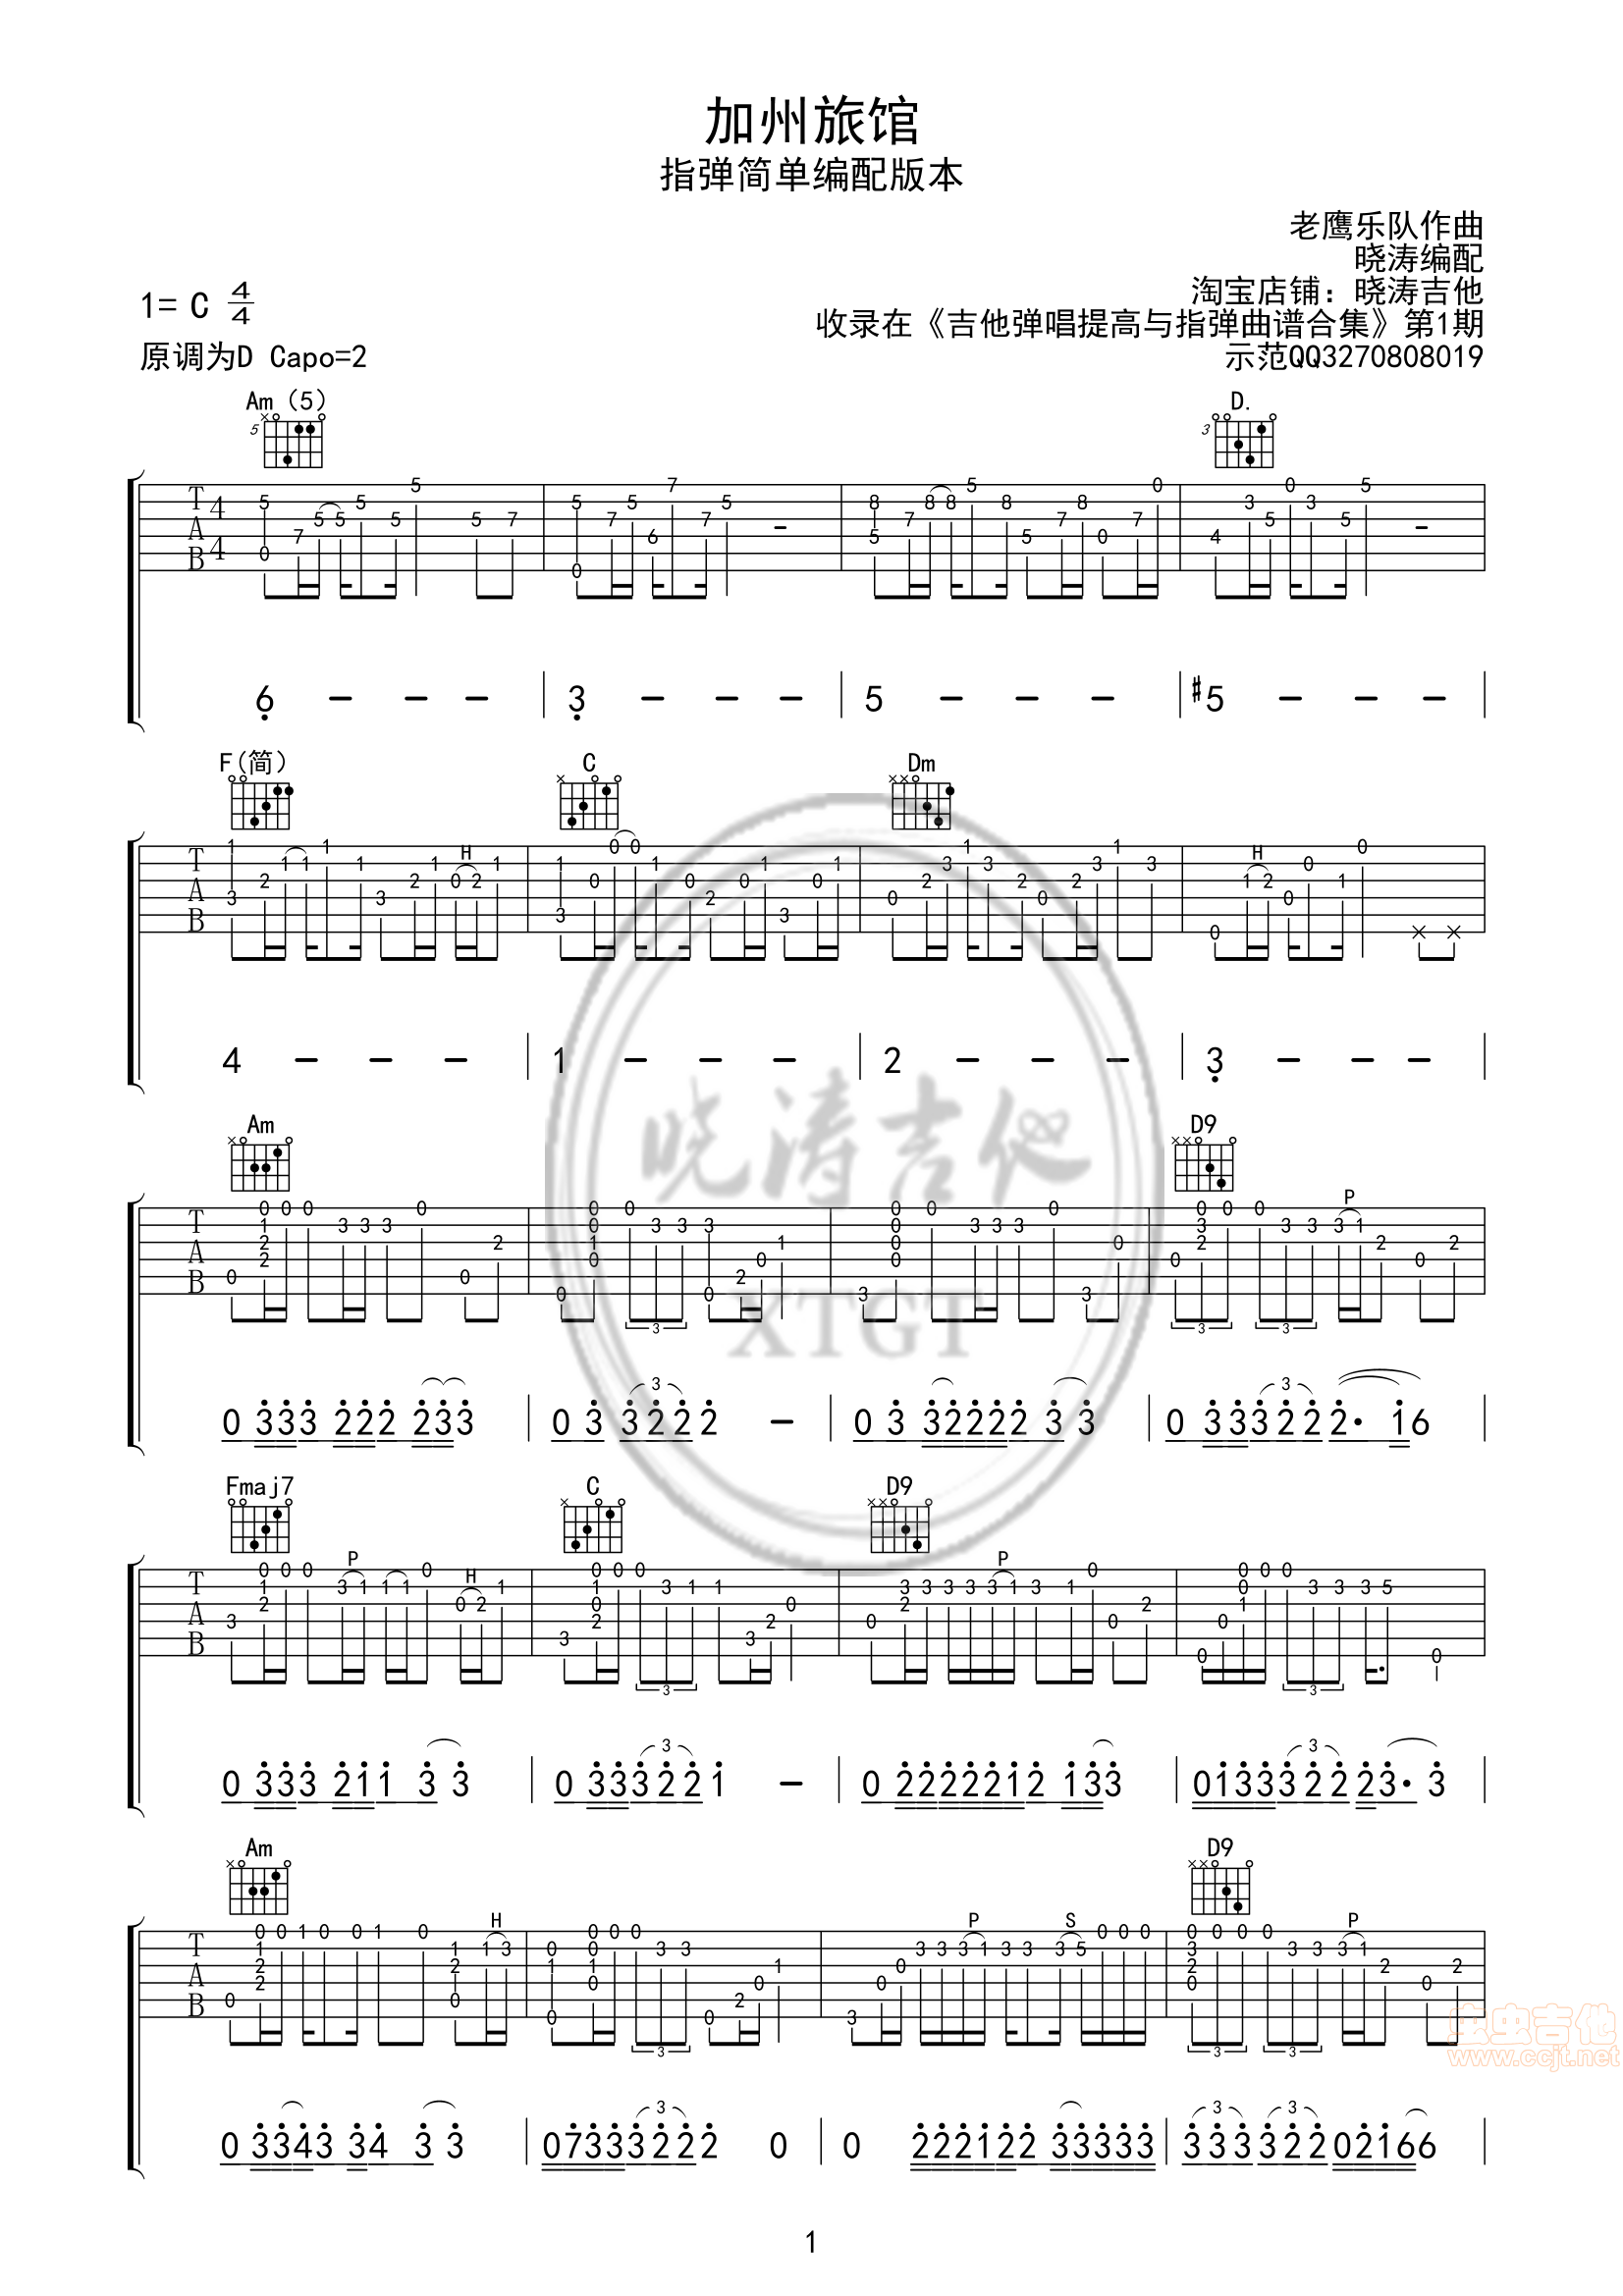 Hotel California by The Eagles - Easy Guitar Tabs Chords Notes Sheet Music Free